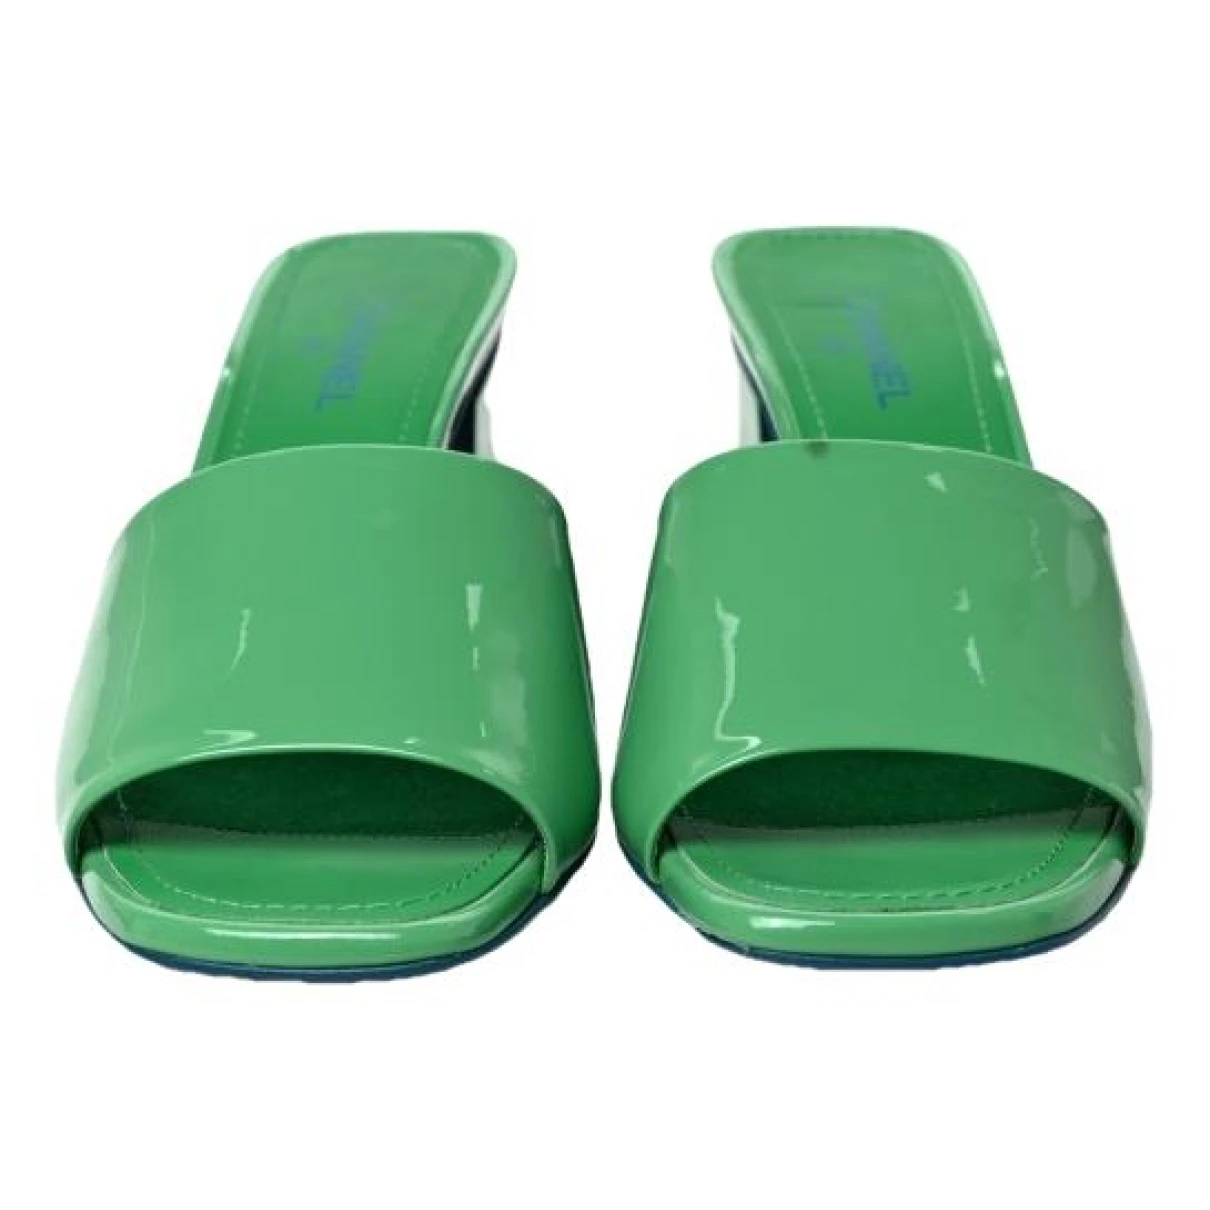 Pre-owned Chanel Patent Leather Sandal In Green